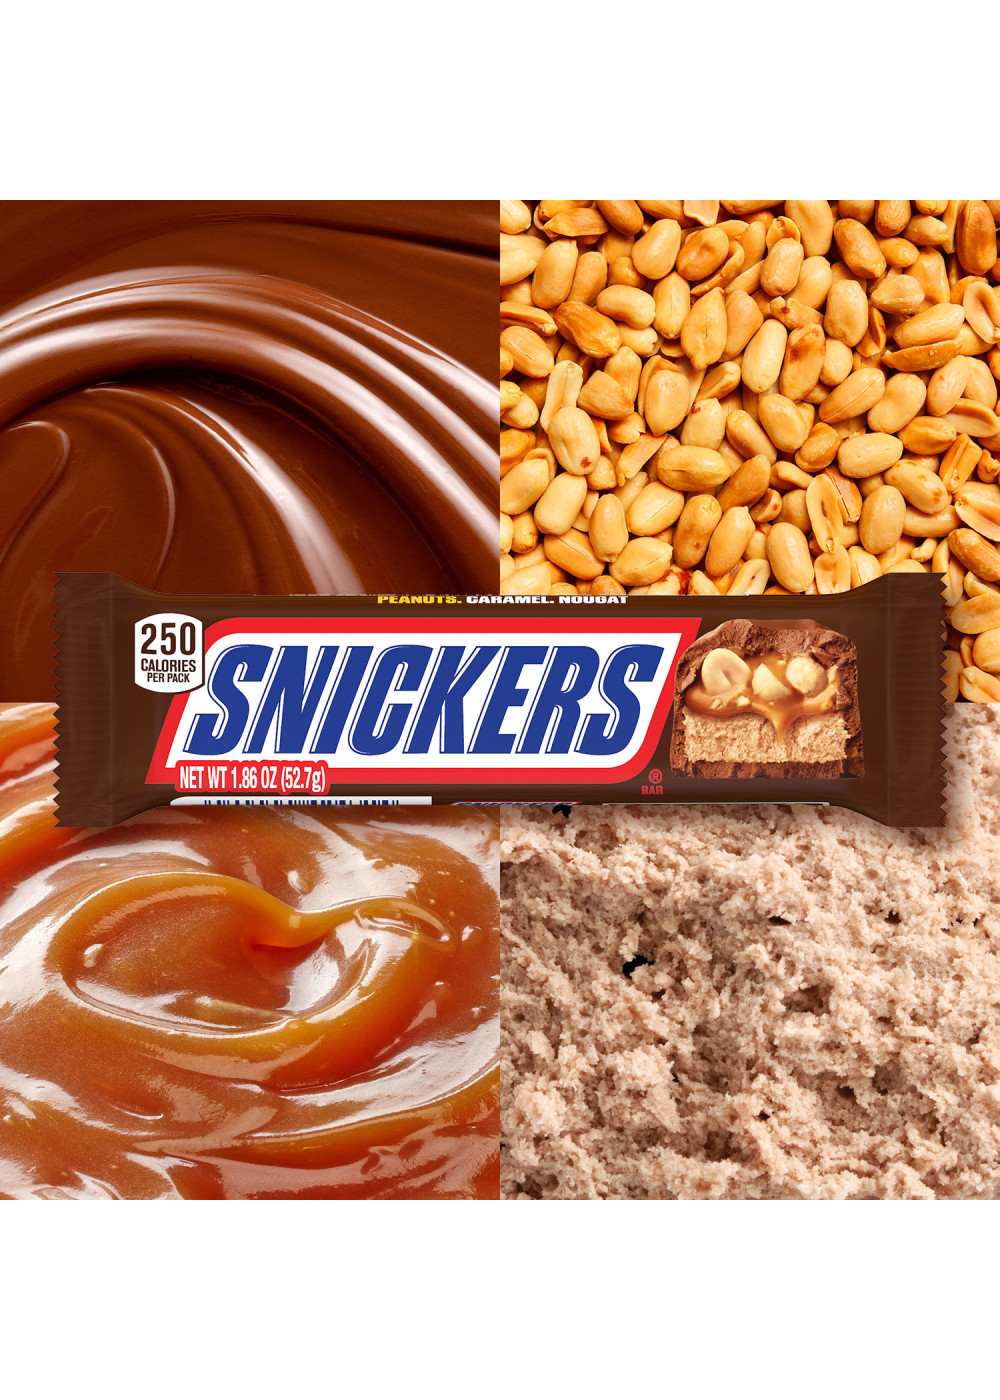 Snickers Chocolate Candy Bar; image 5 of 8